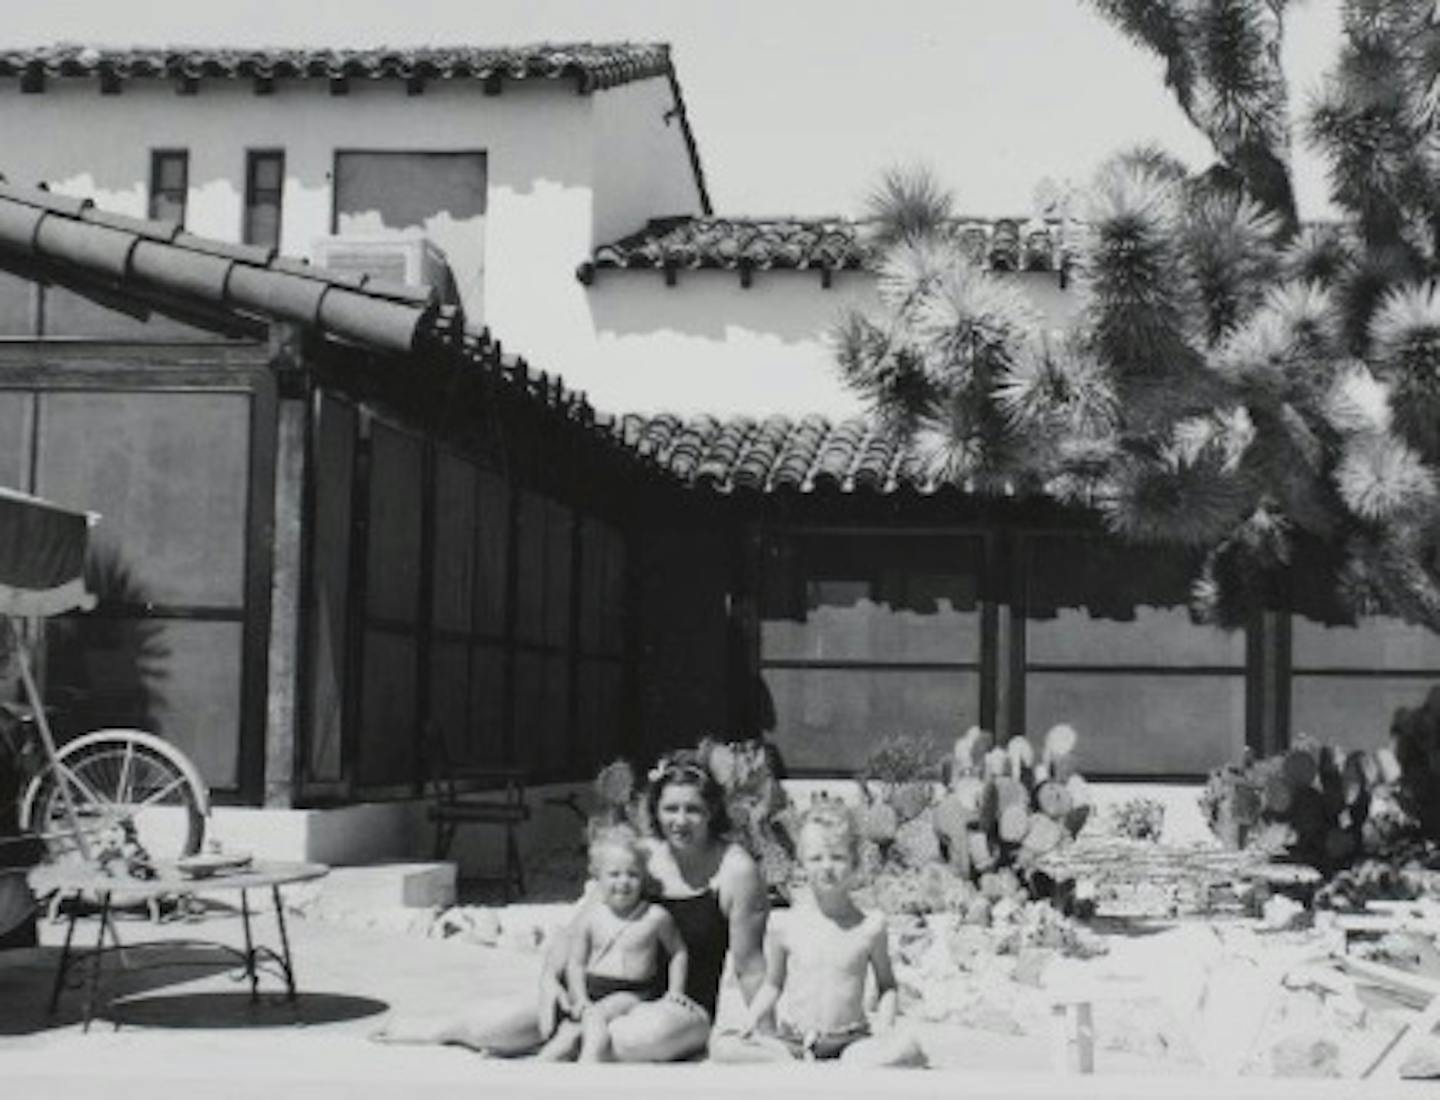 Black and white photo of woman in bathing suit and two boys in bathing suits posing by a swimming pool.